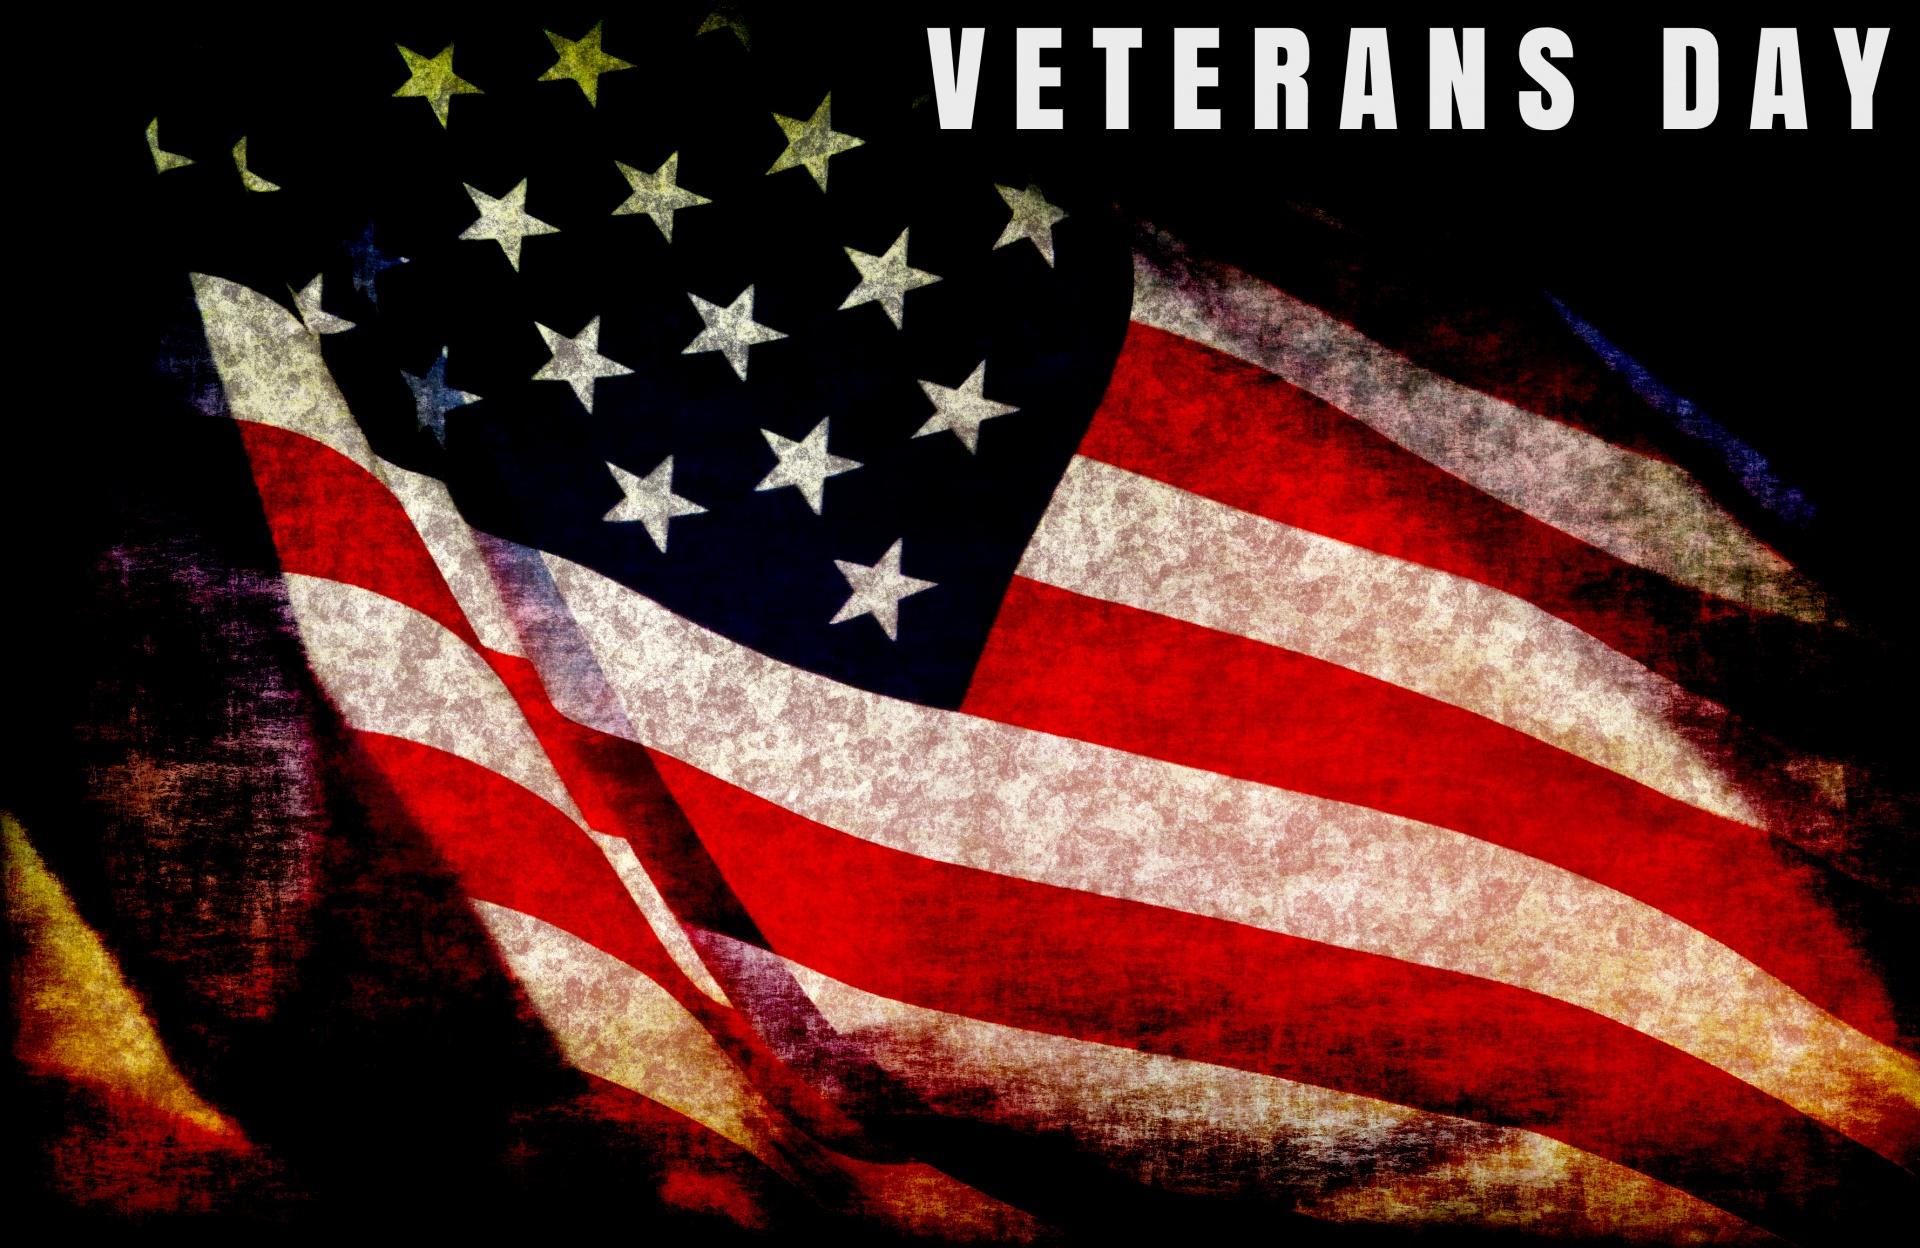 Happy Veterans Day Image 2019 Free for Public Domain